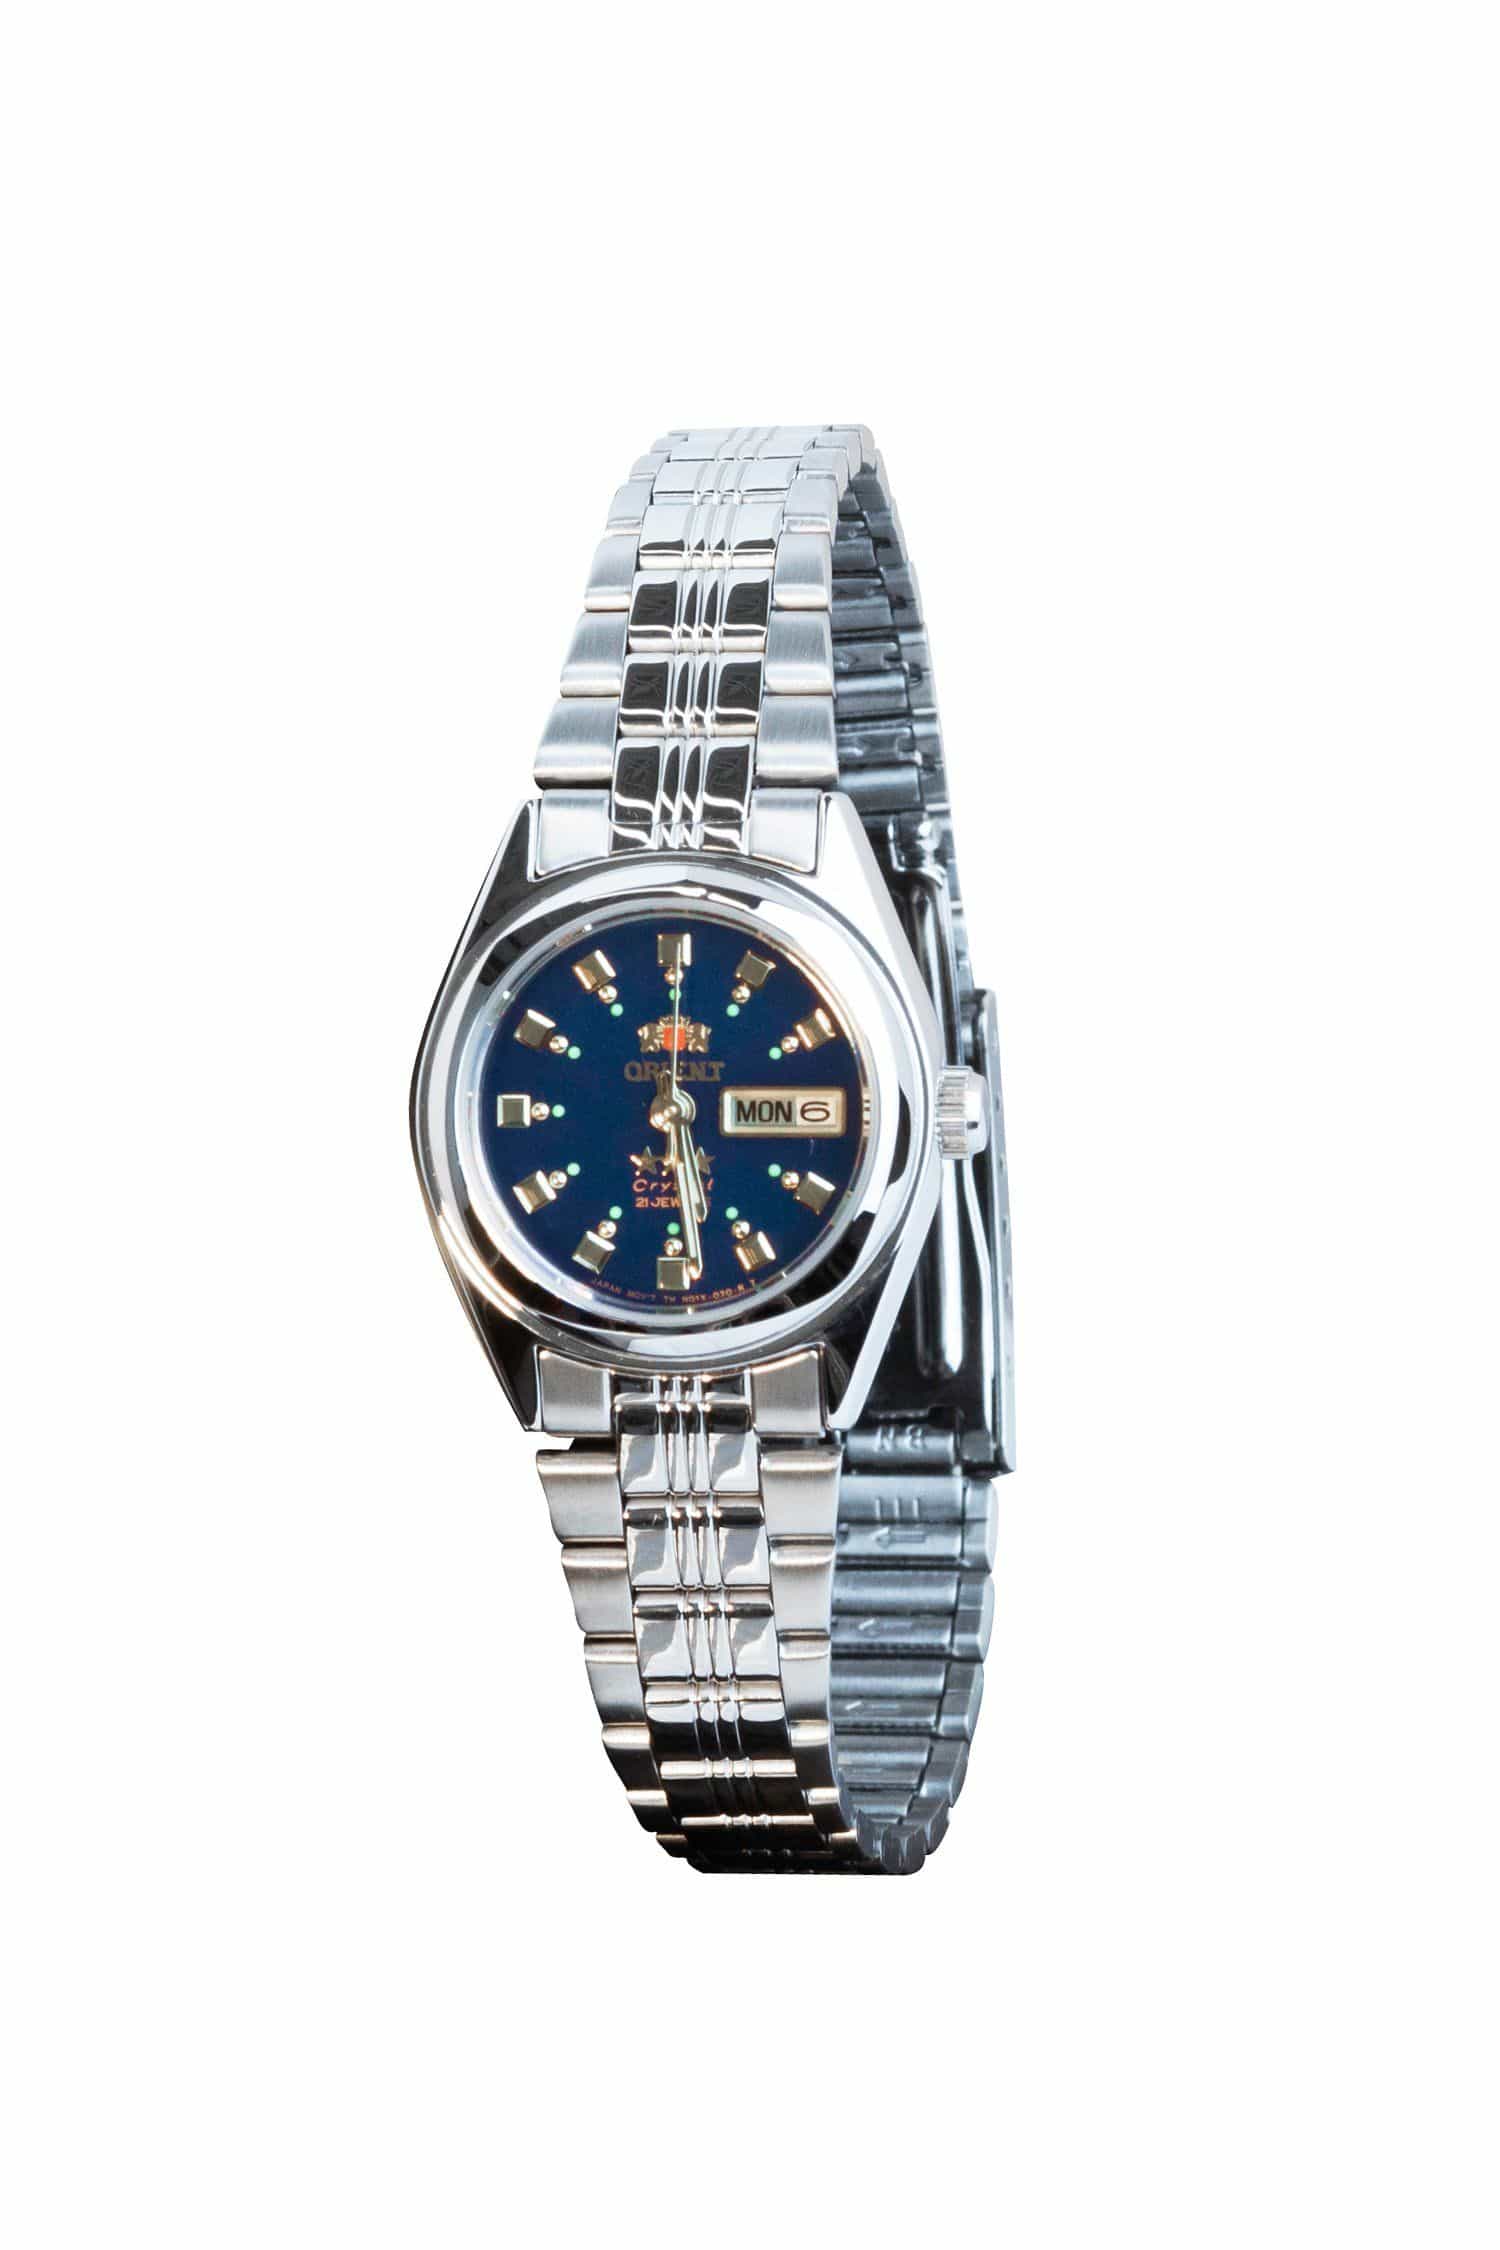 ORIENT AUTOMATIC CLASSIC 3 STAR WATCH